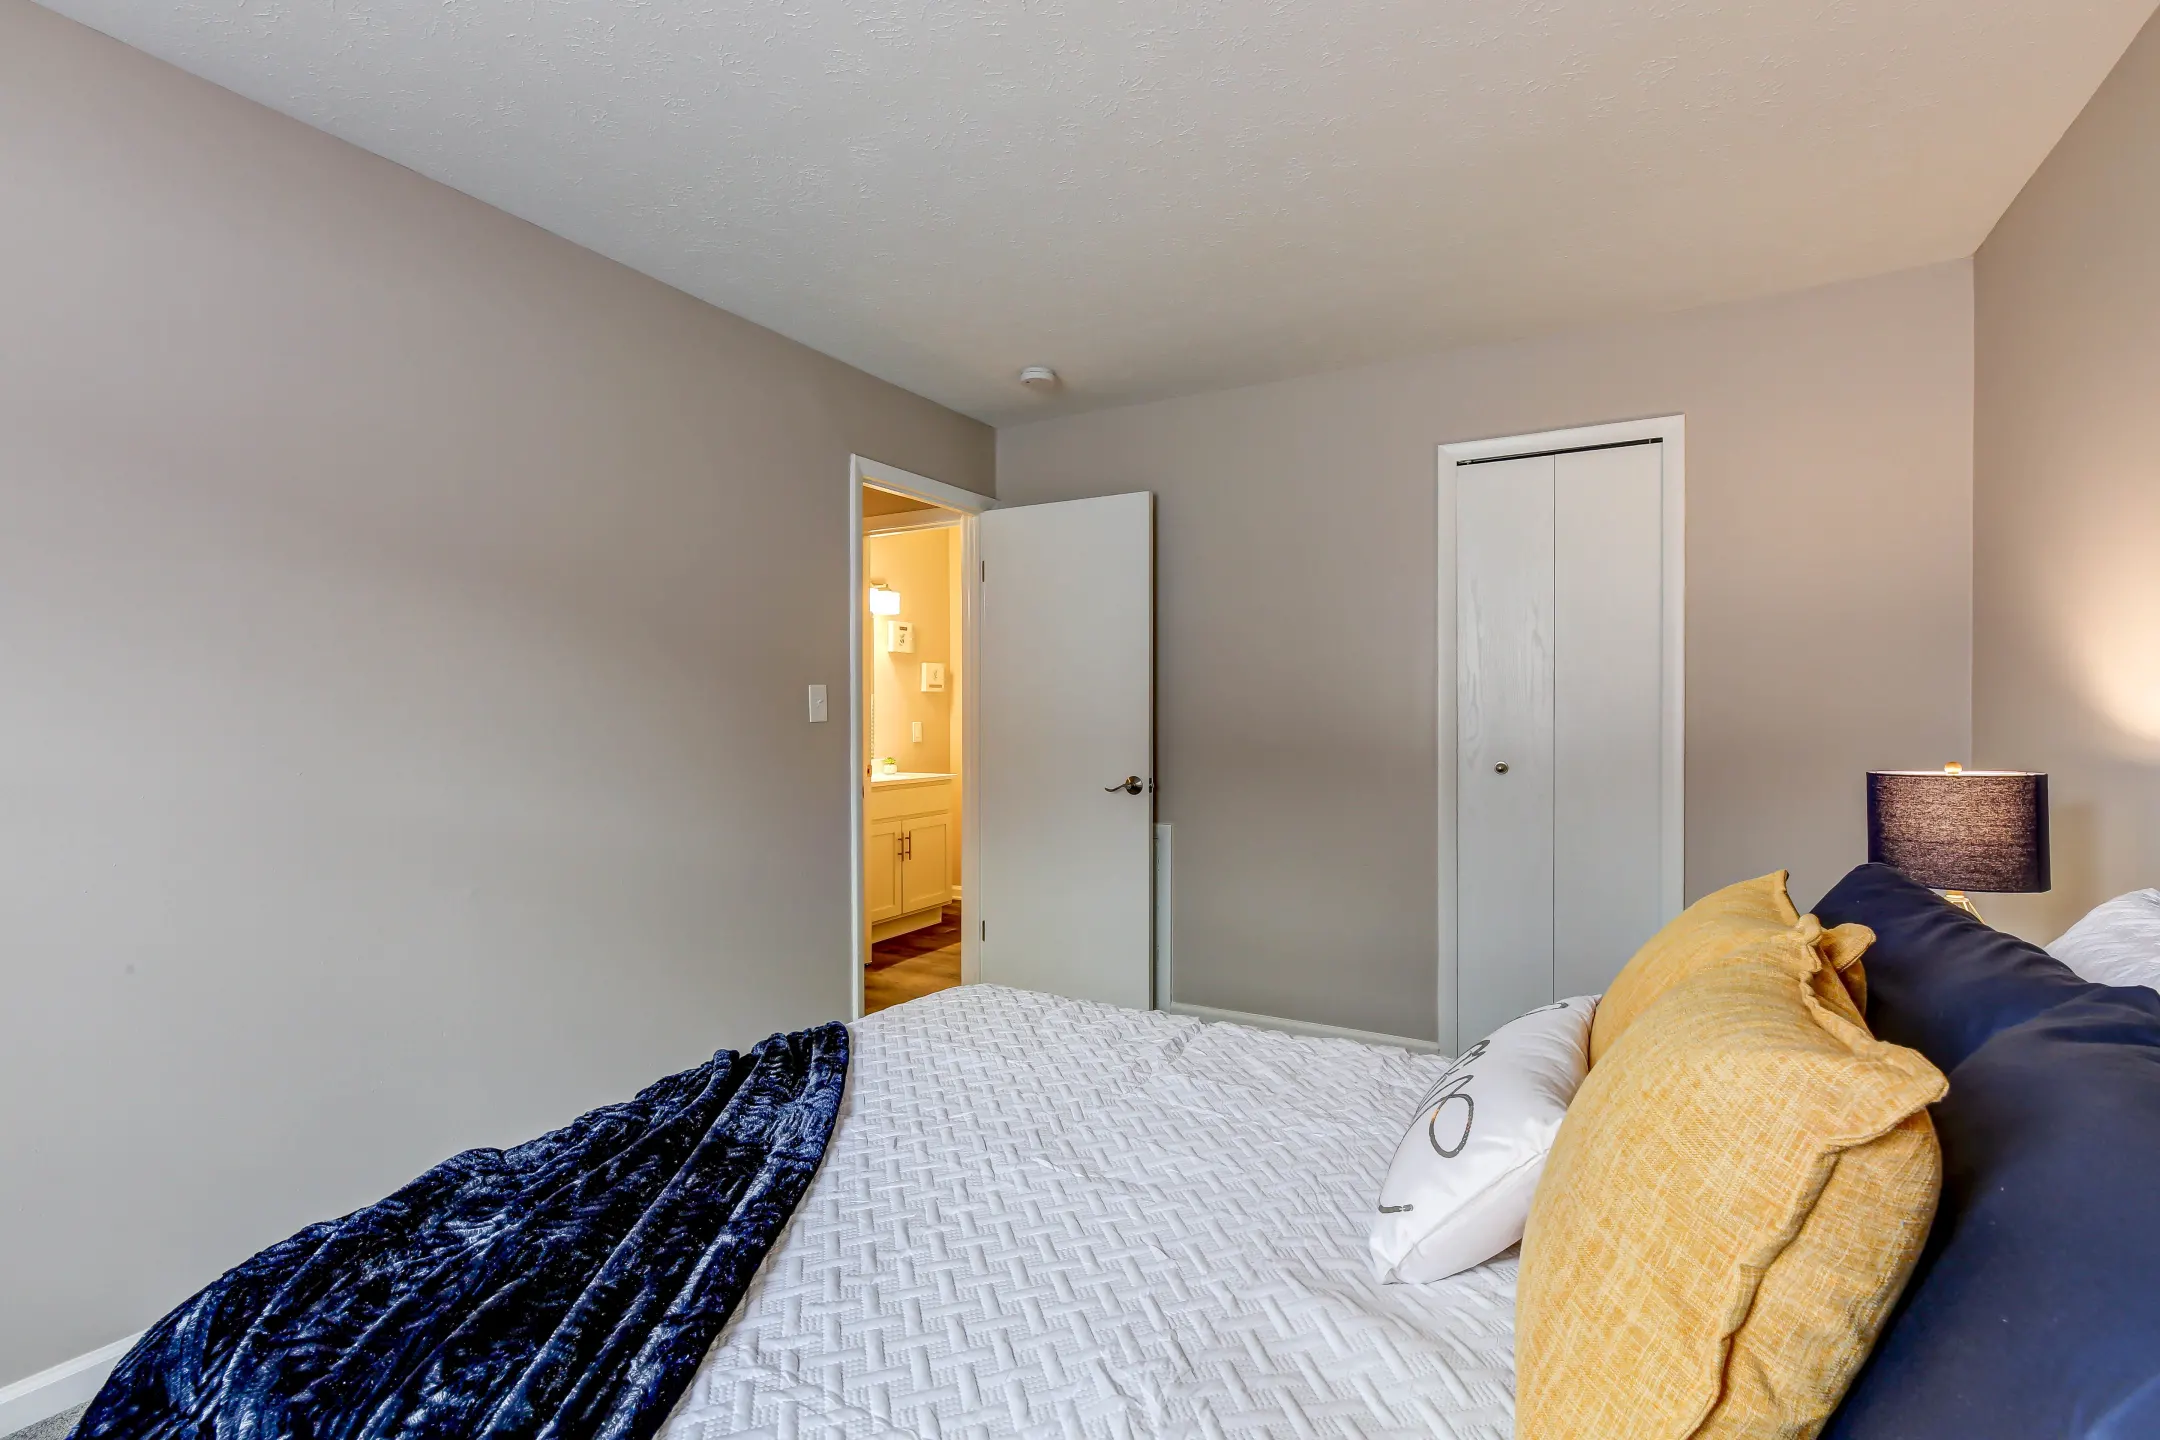 Bedroom - Jamestown Village Apartments - North Olmsted, OH